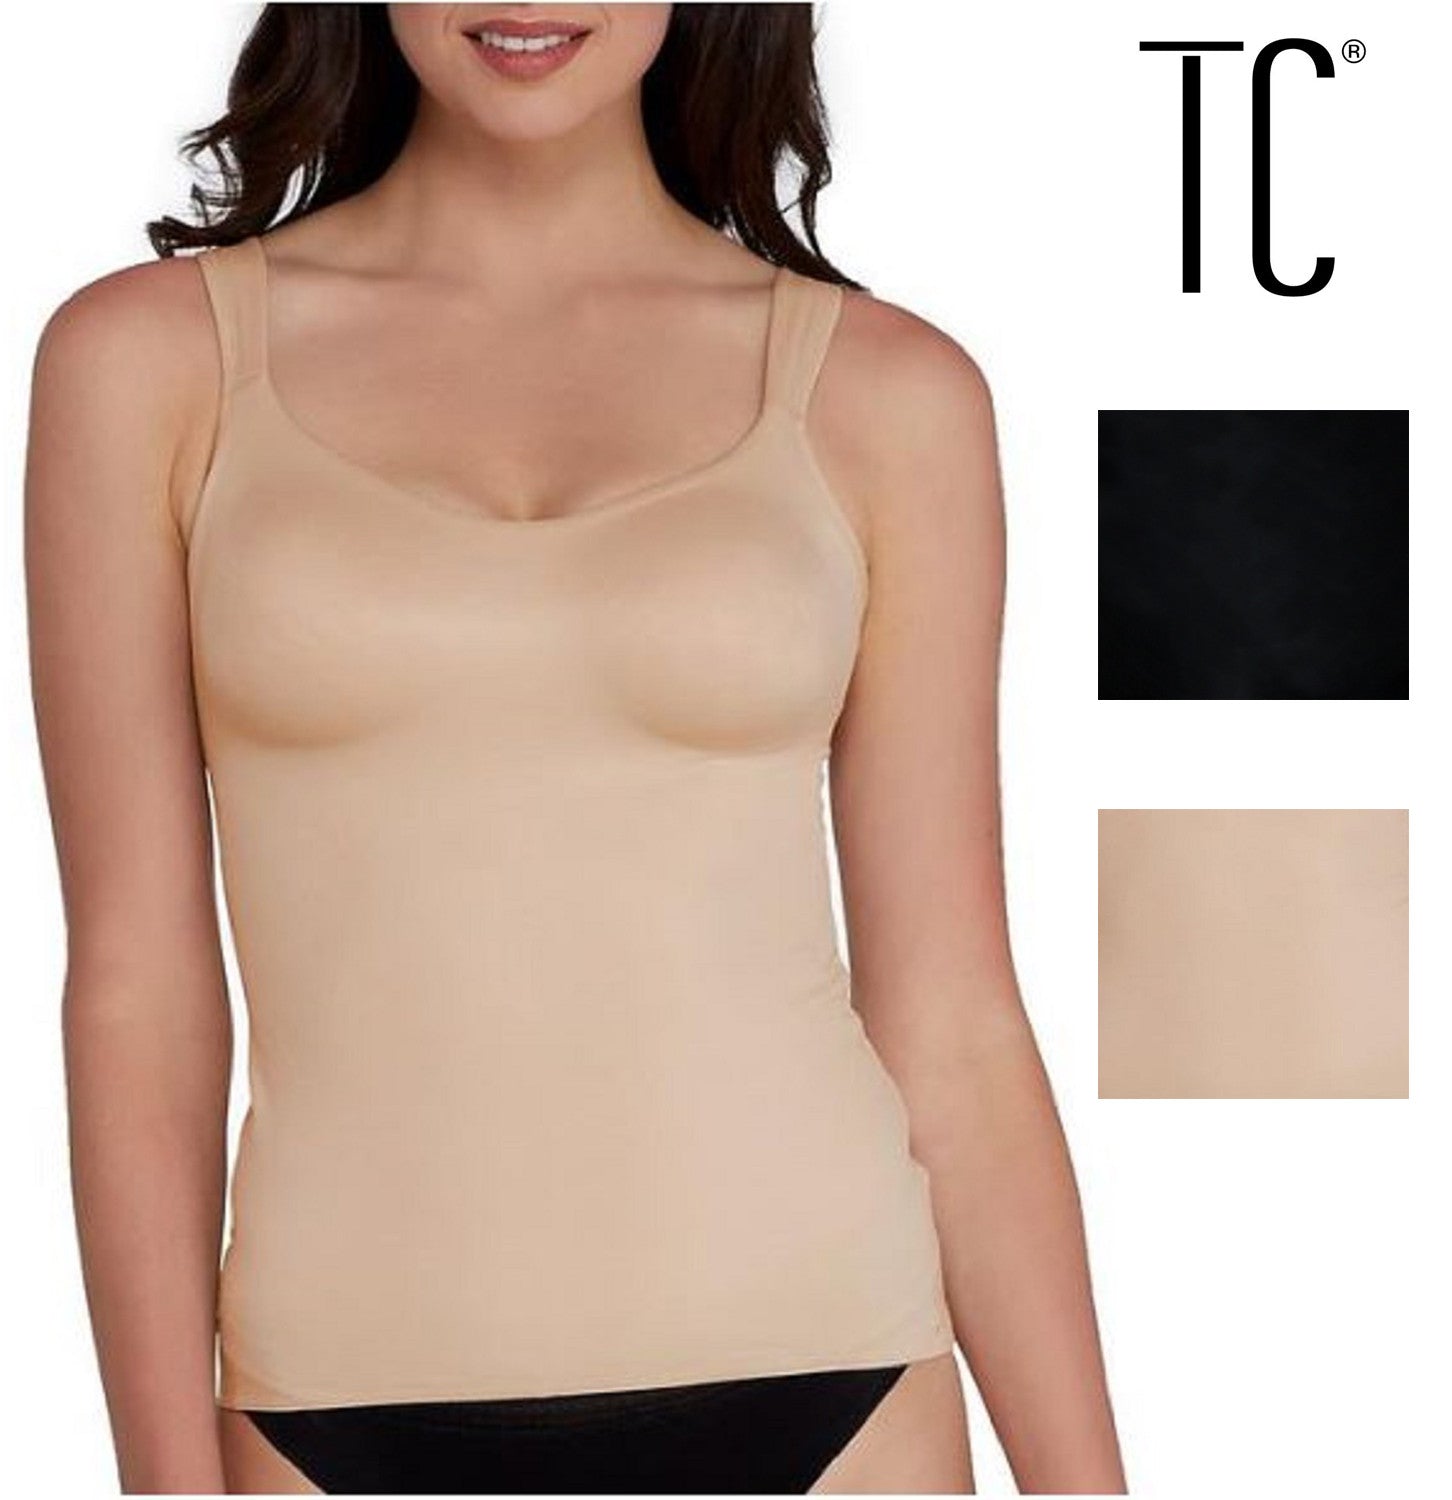 TC Fine Intimates Back Magic Extra-Firm Control Shaping High-Waist